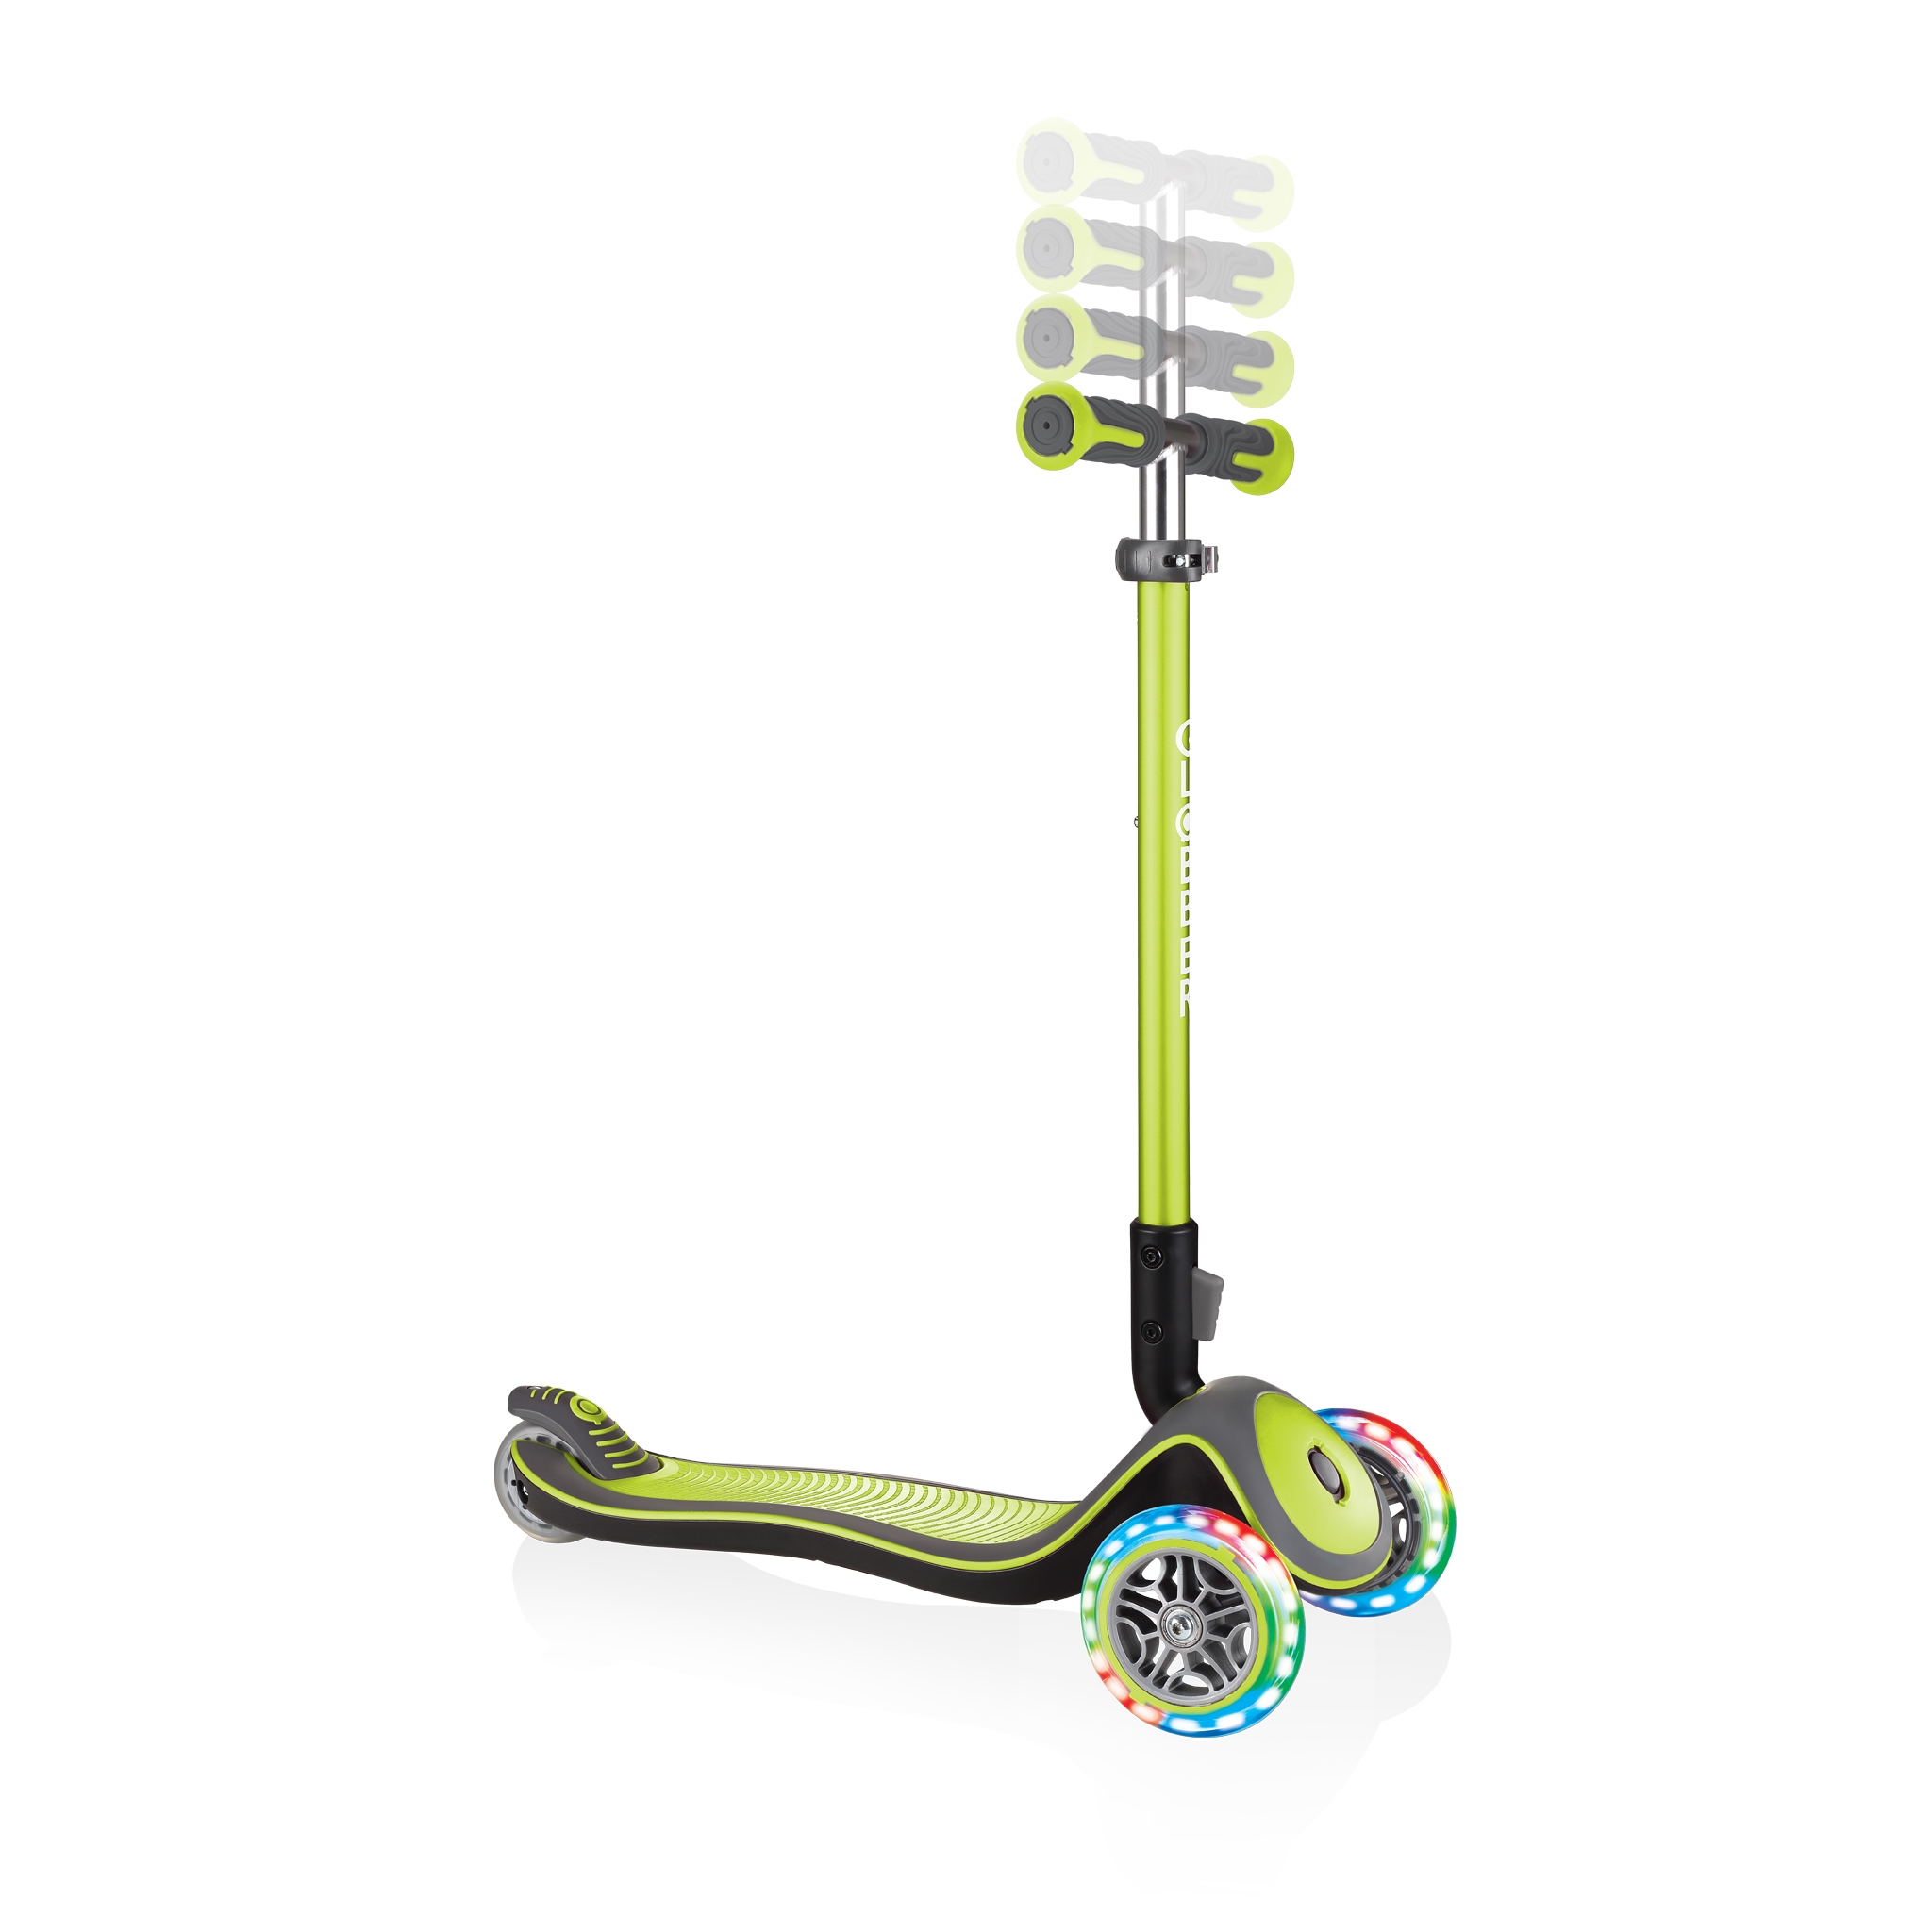 Globber-ELITE-DELUXE-LIGHTS-3-wheel-adjustable-scooter-for-kids-with-light-up-scooter-wheels-lime-green 1